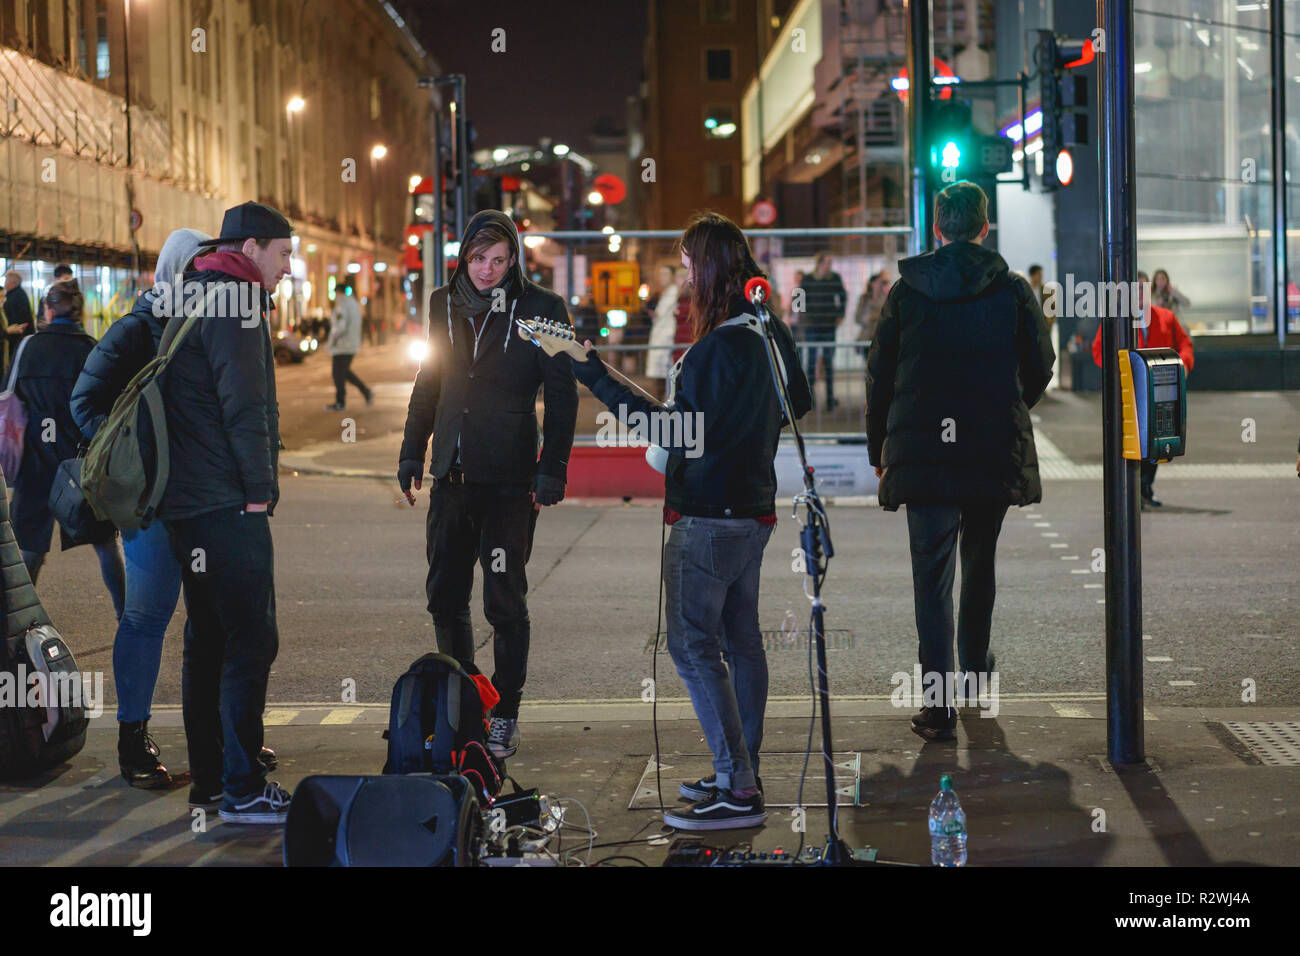 London, UK - February, 2019. A street group of musicians performing on the street near Oxford street. Stock Photo